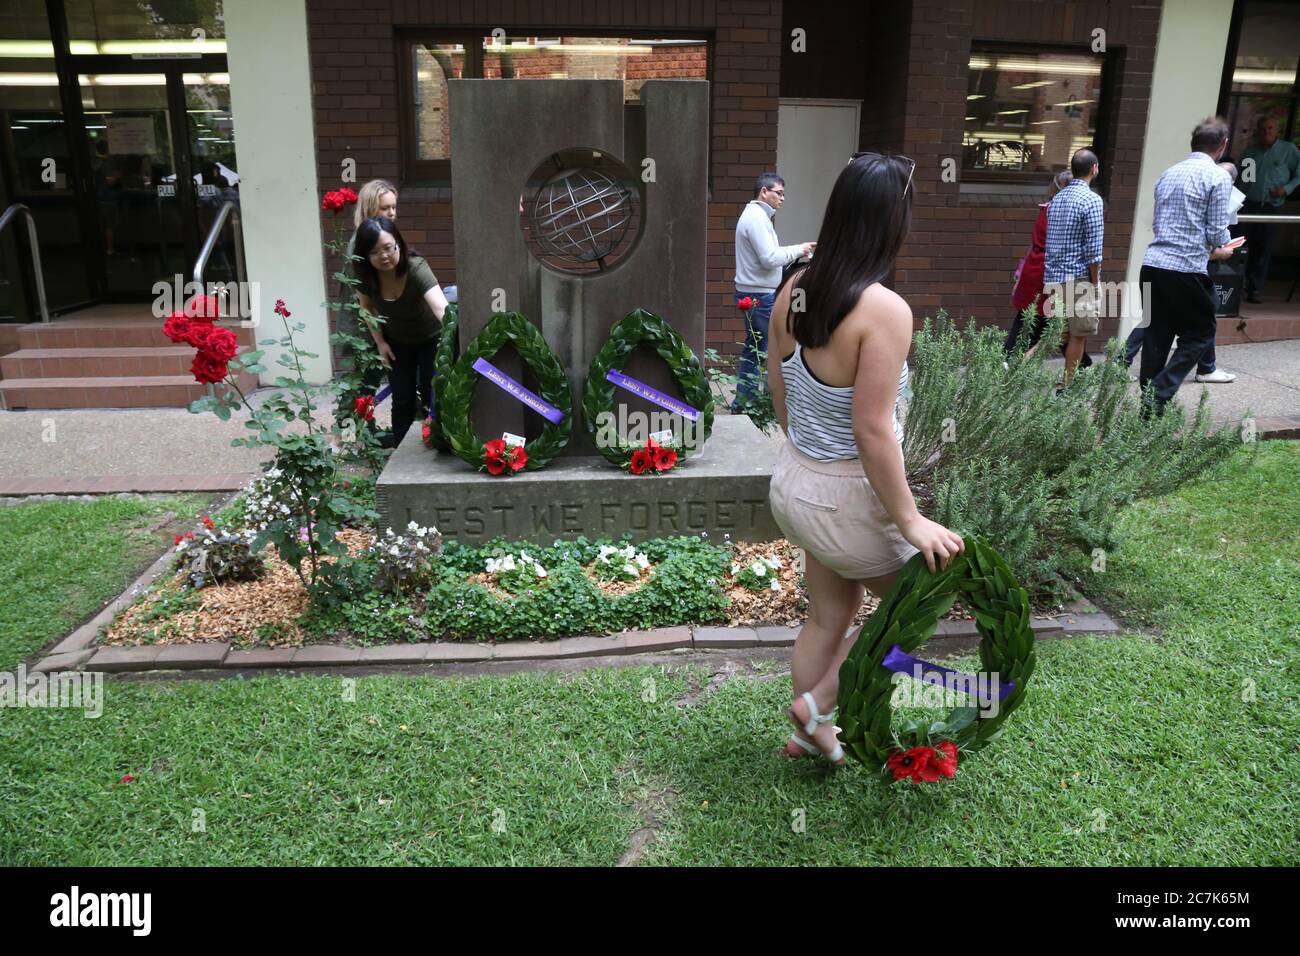 Wreaths are laid and people take photos at the memorial at the end of the traditional Remembrance Day service at Ultimo TAFE in Sydney. Stock Photo